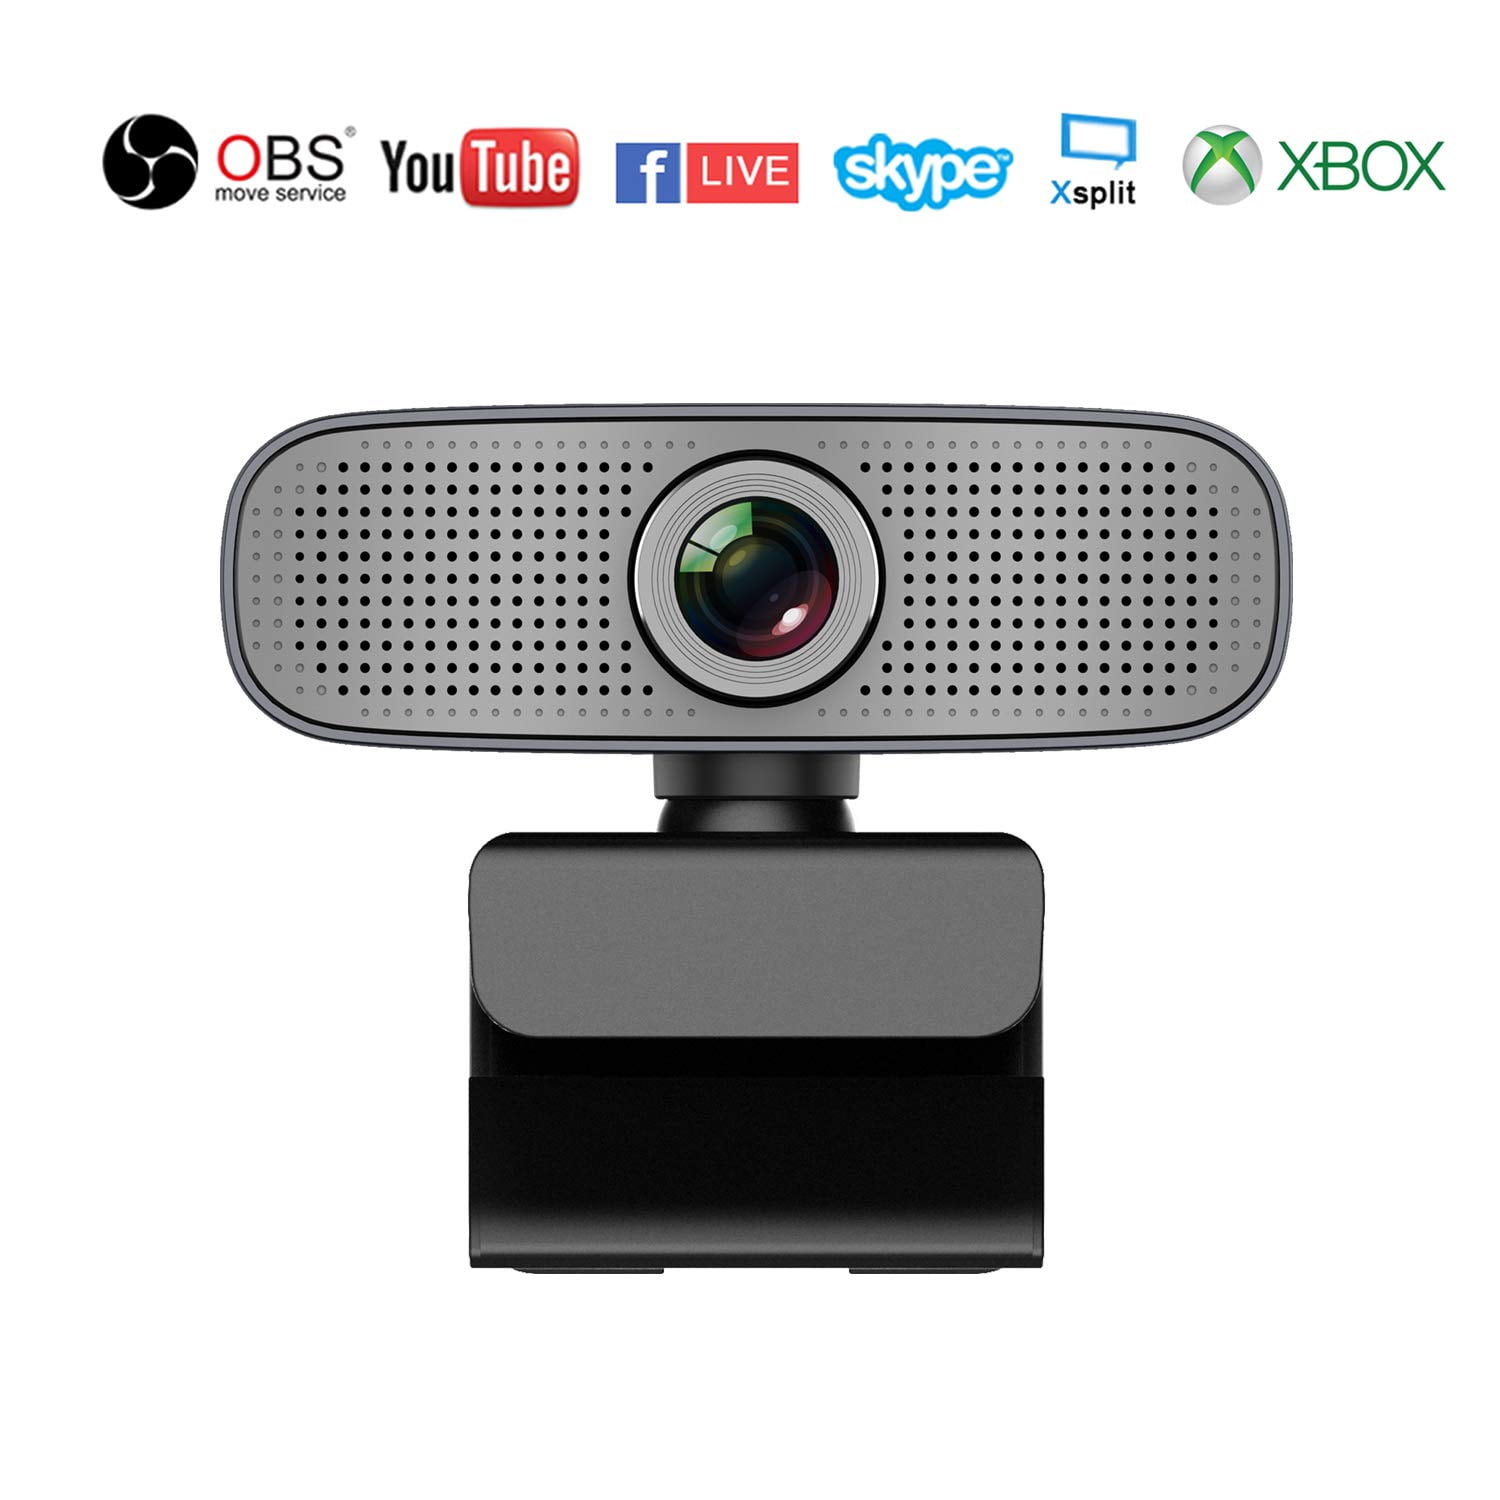 Full Hd 1080p Webcam Streaming Xbox One Youtube Obs Twitch Compatible Skype Webcam Built In Dual Microphones Computer Camera Compatible For Mac Windows 10 8 7 Walmart Com Walmart Com